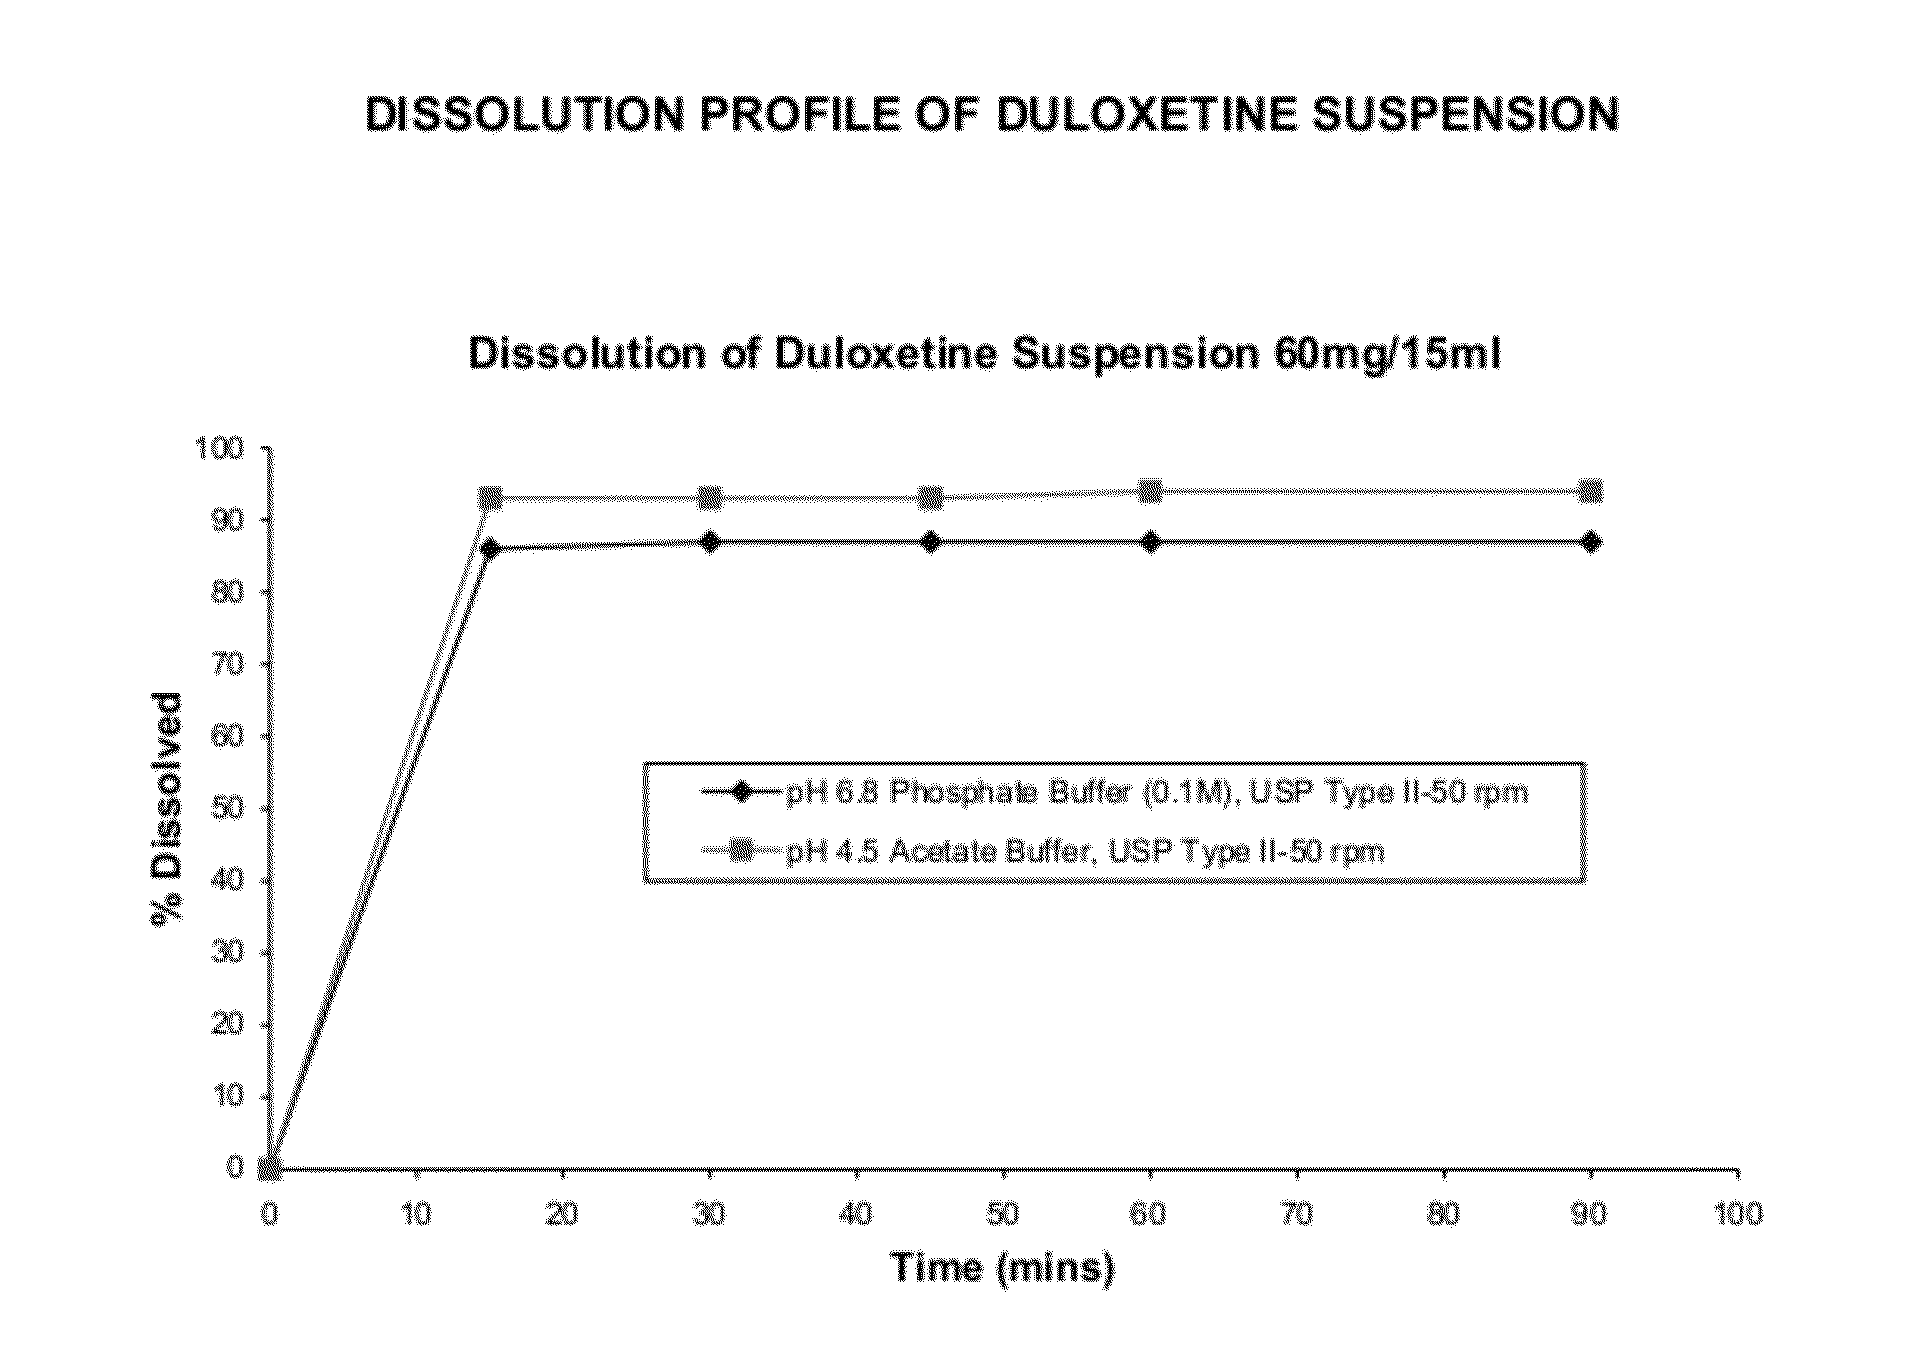 Pharmaceutical composition of duloxetine